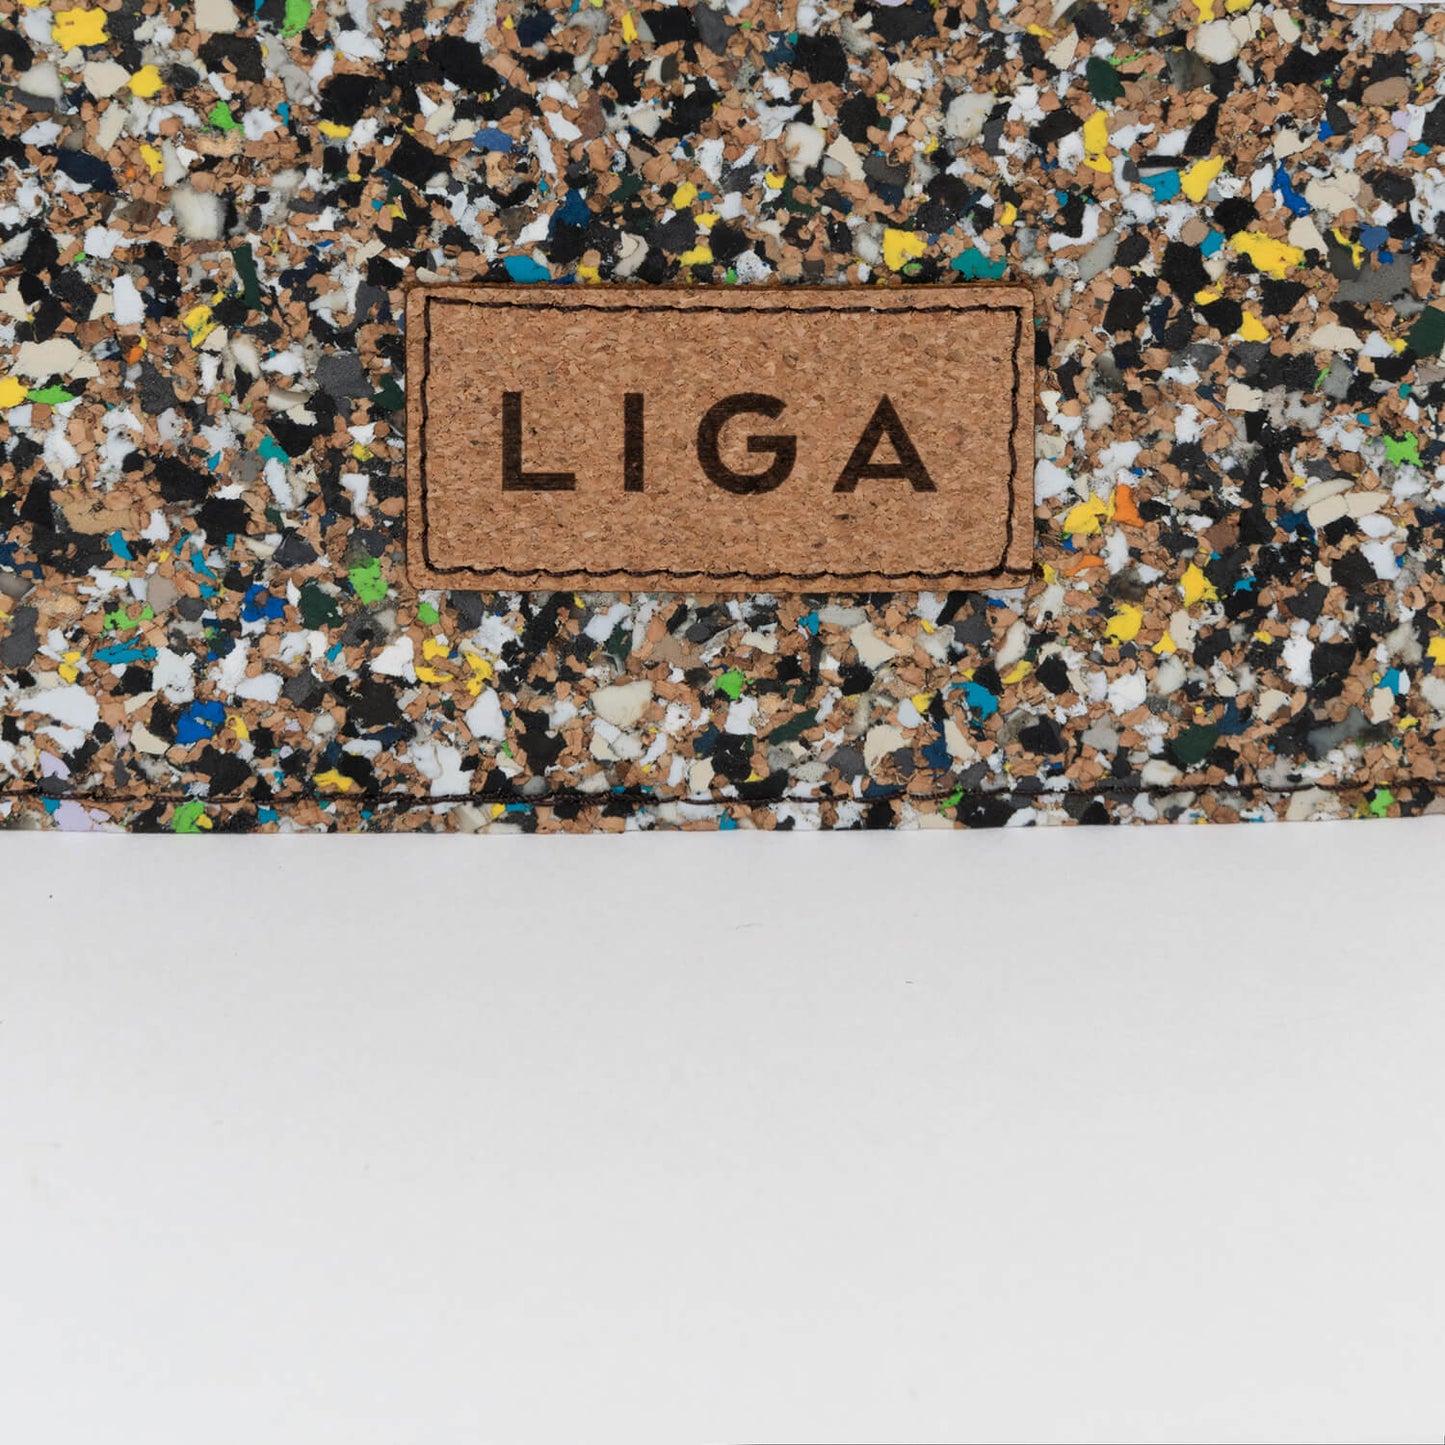 CLOSE UP OF LIGA BRANDING LABLE ON THE BACK OF THE NOTEBOOK